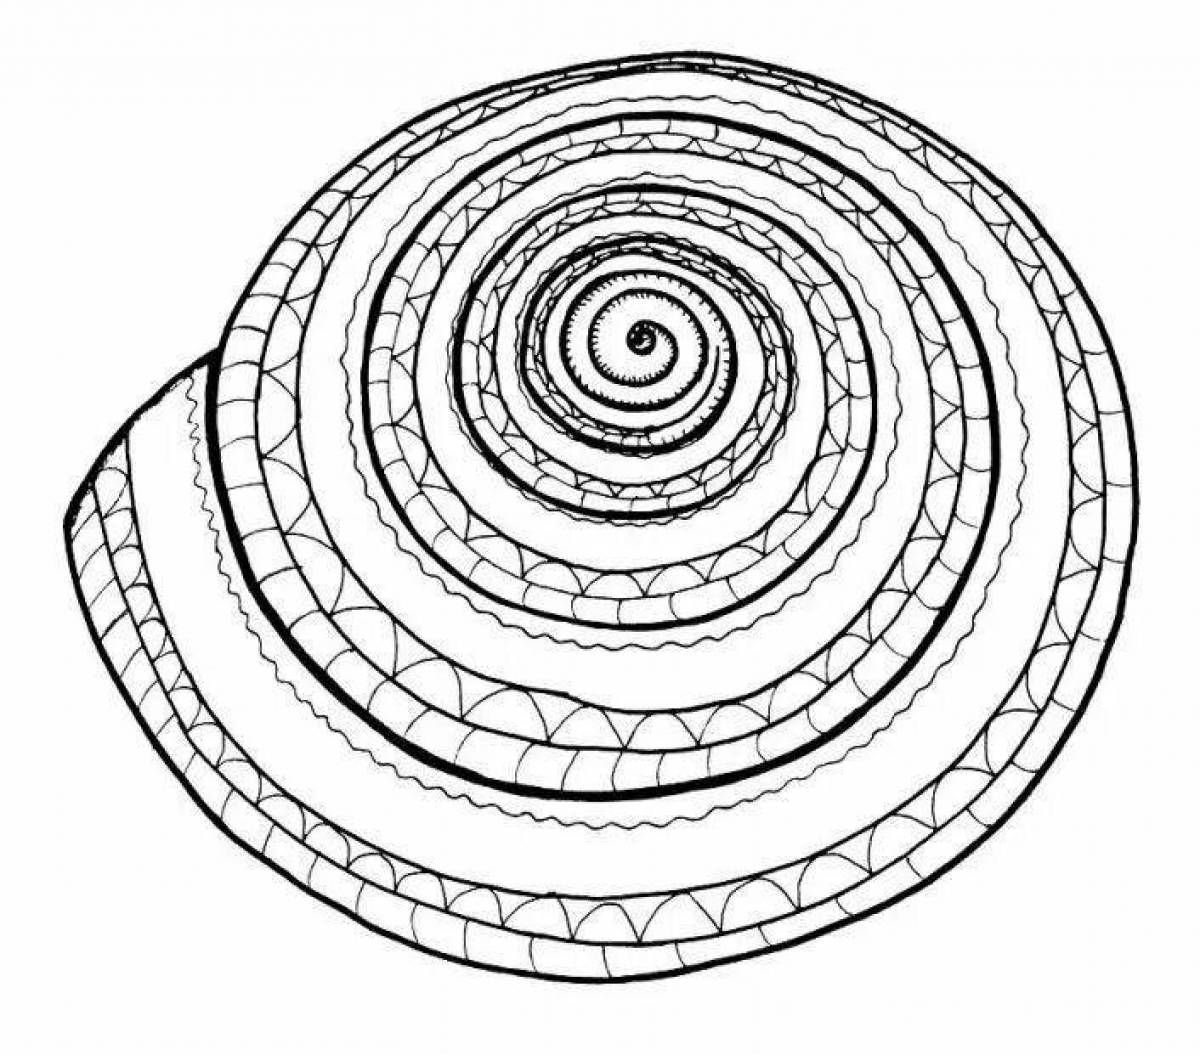 Creating a colorful spiral coloring page